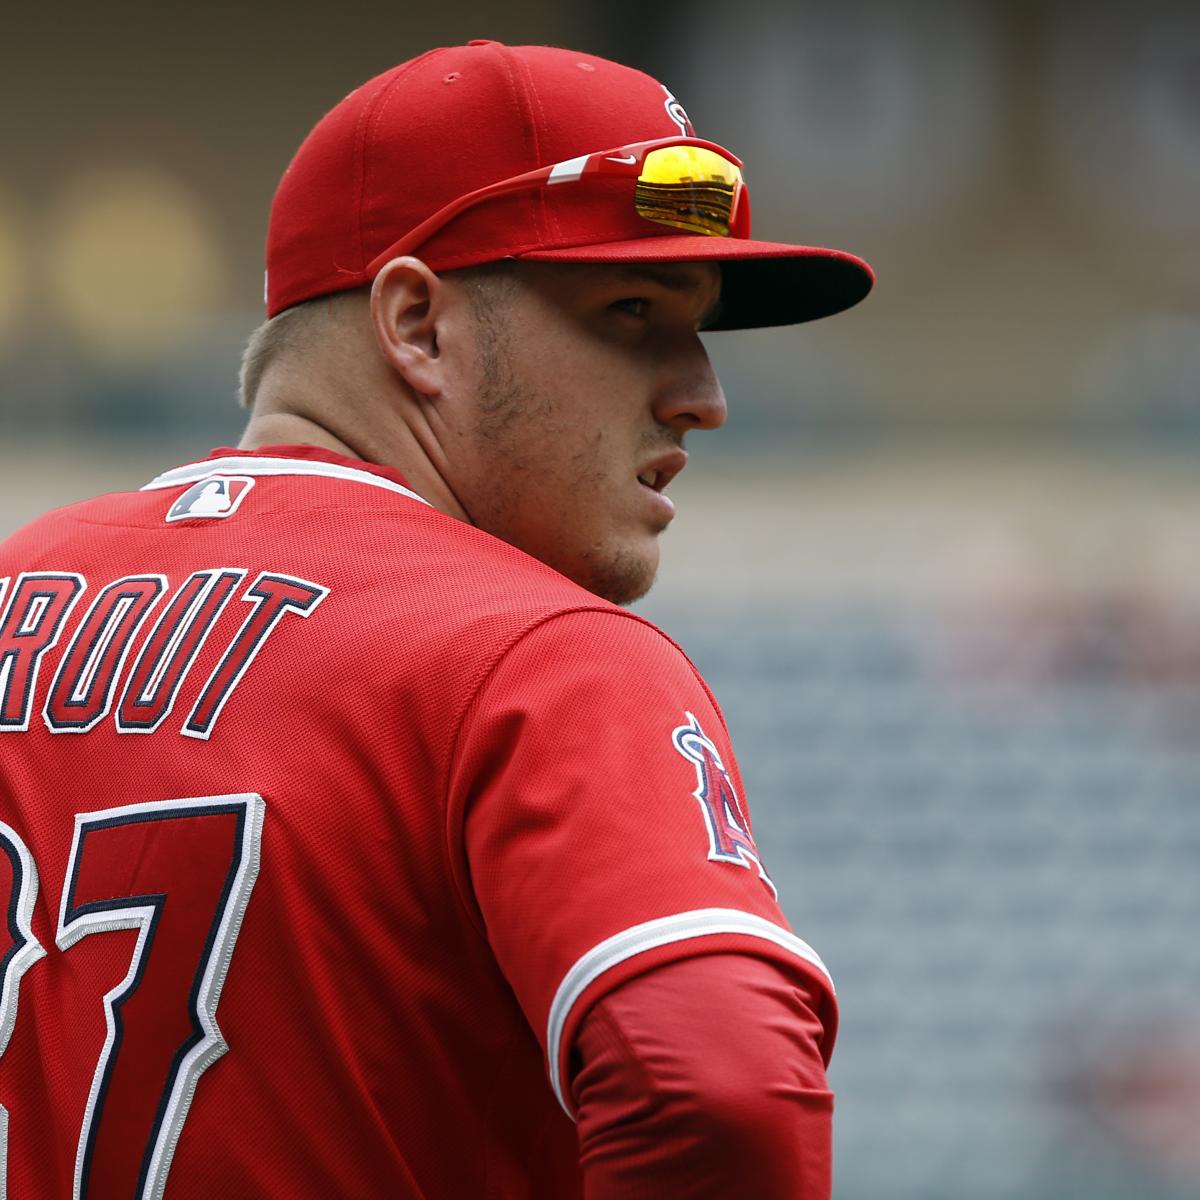 5 Defining Moments in 2012 for South Jersey's Mike Trout (so far) [VIDEO]